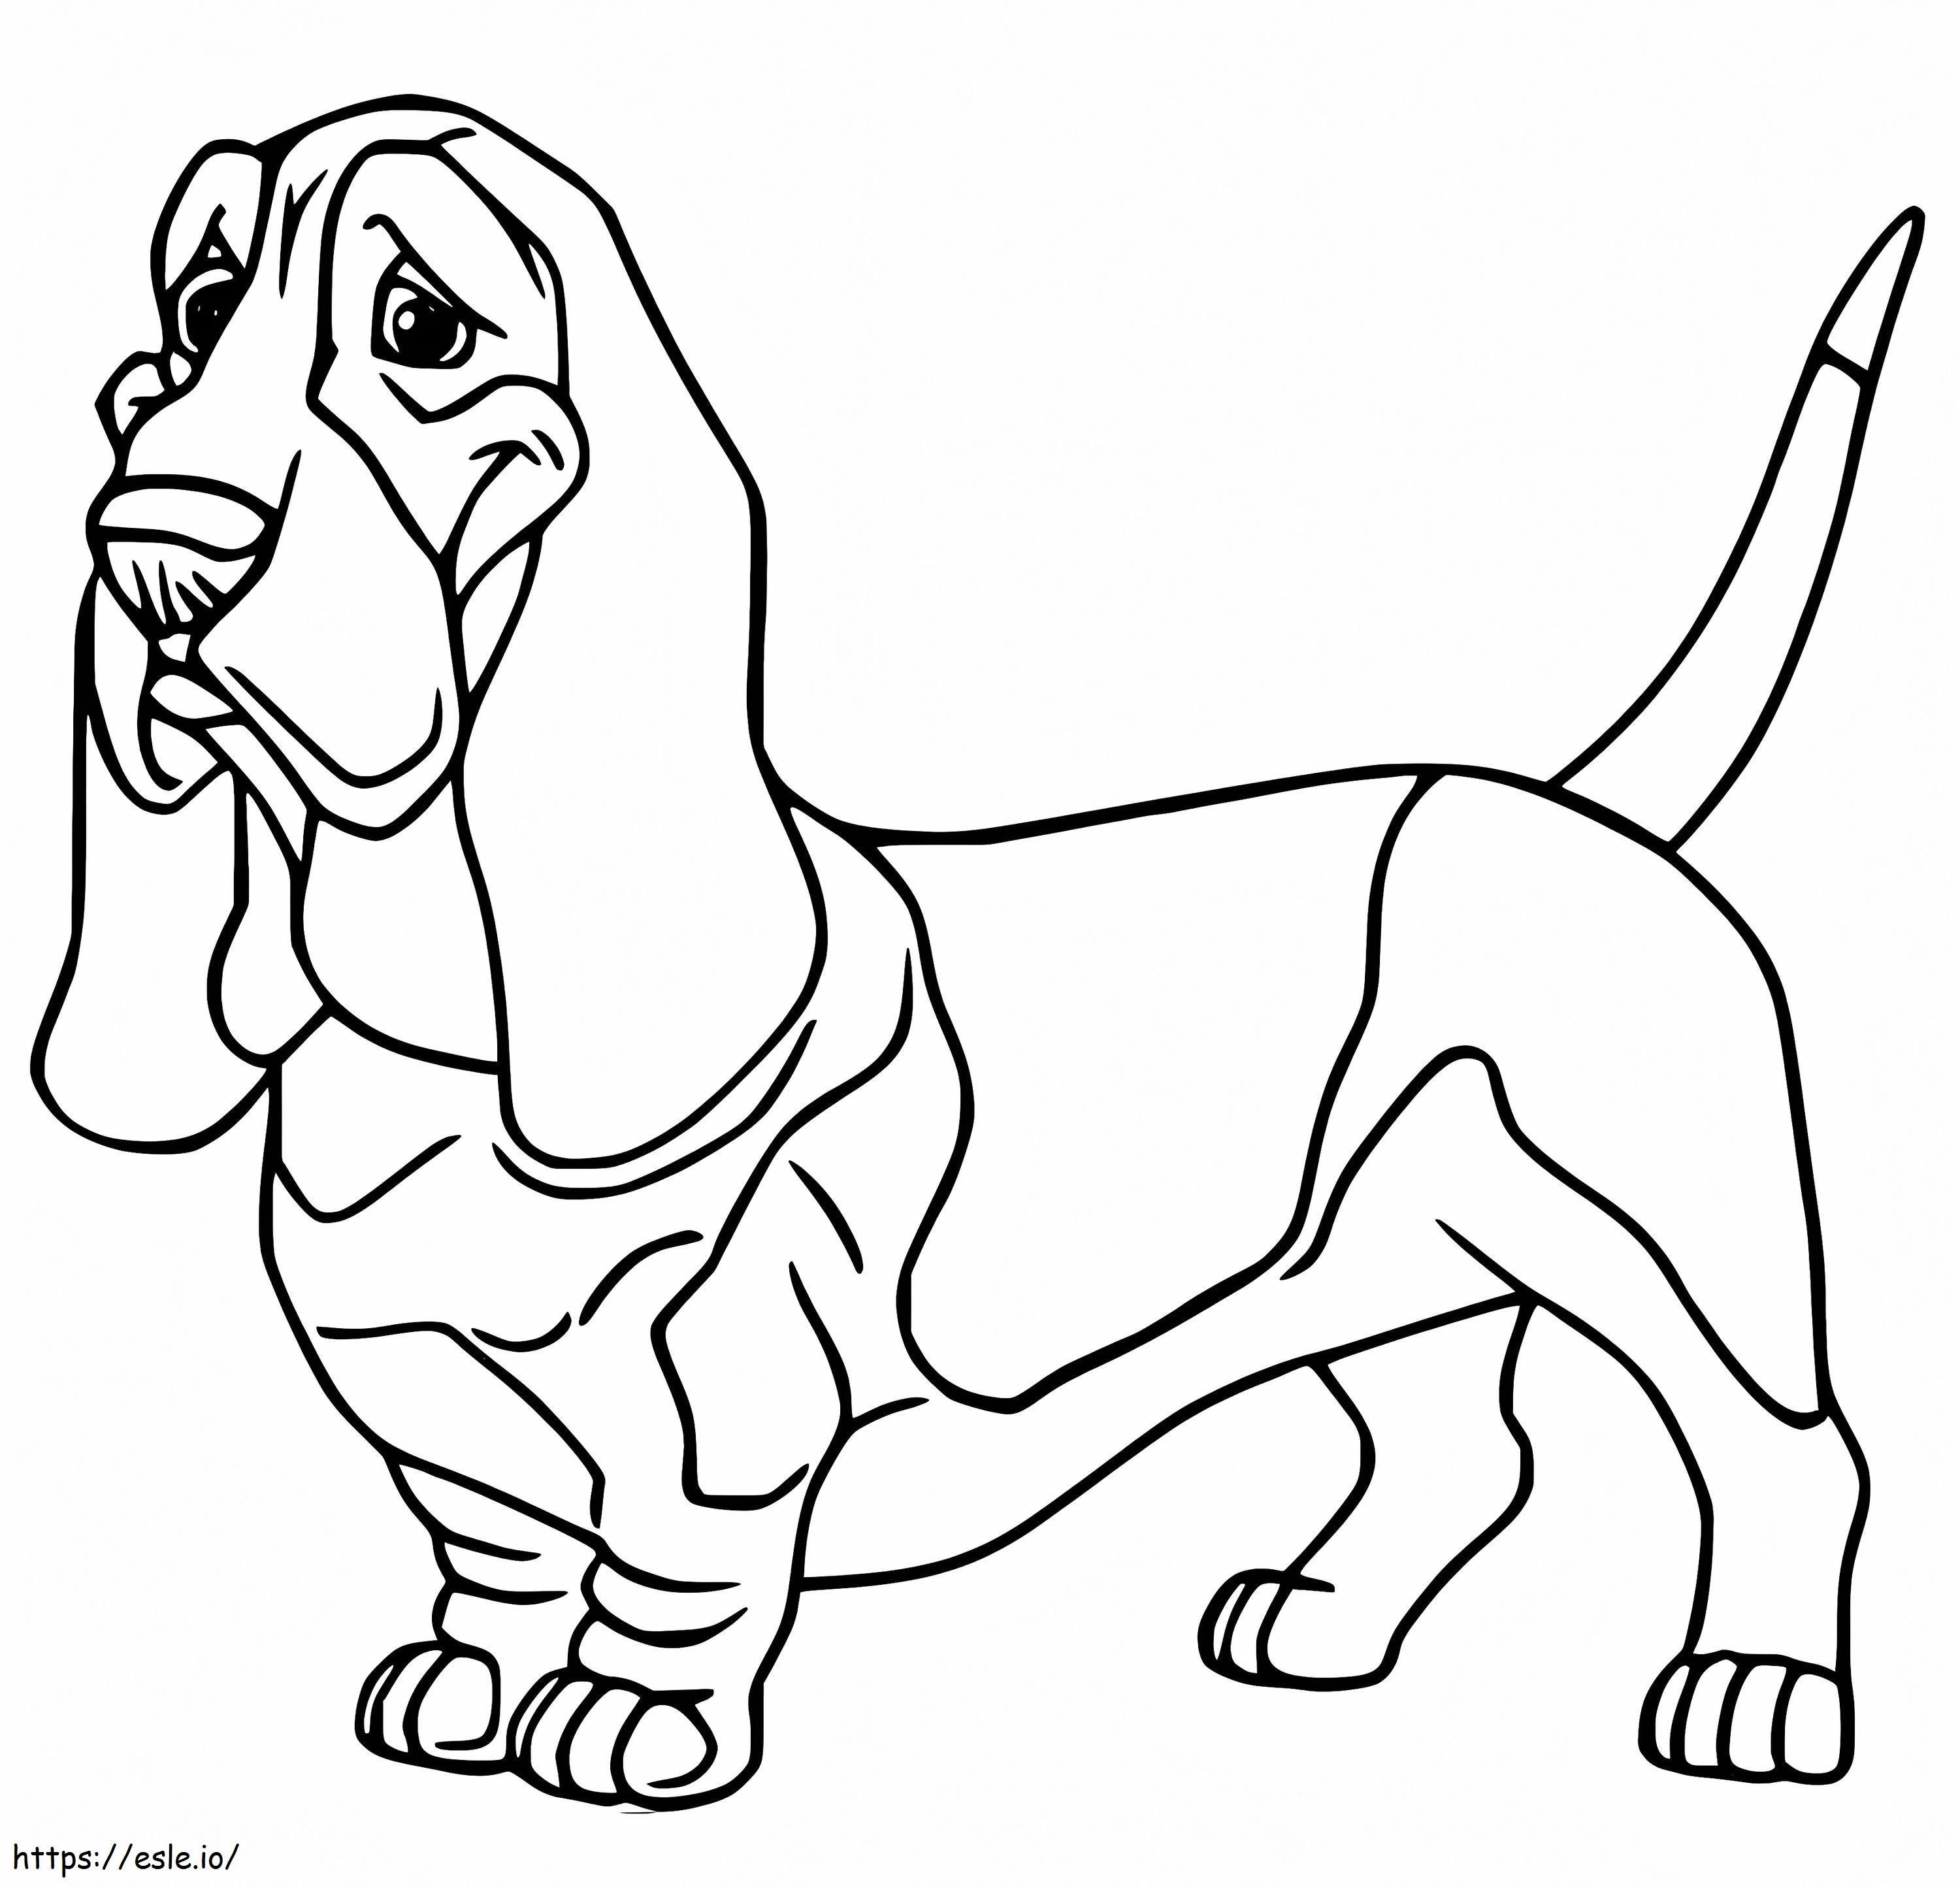 Basset Hound 1 coloring page